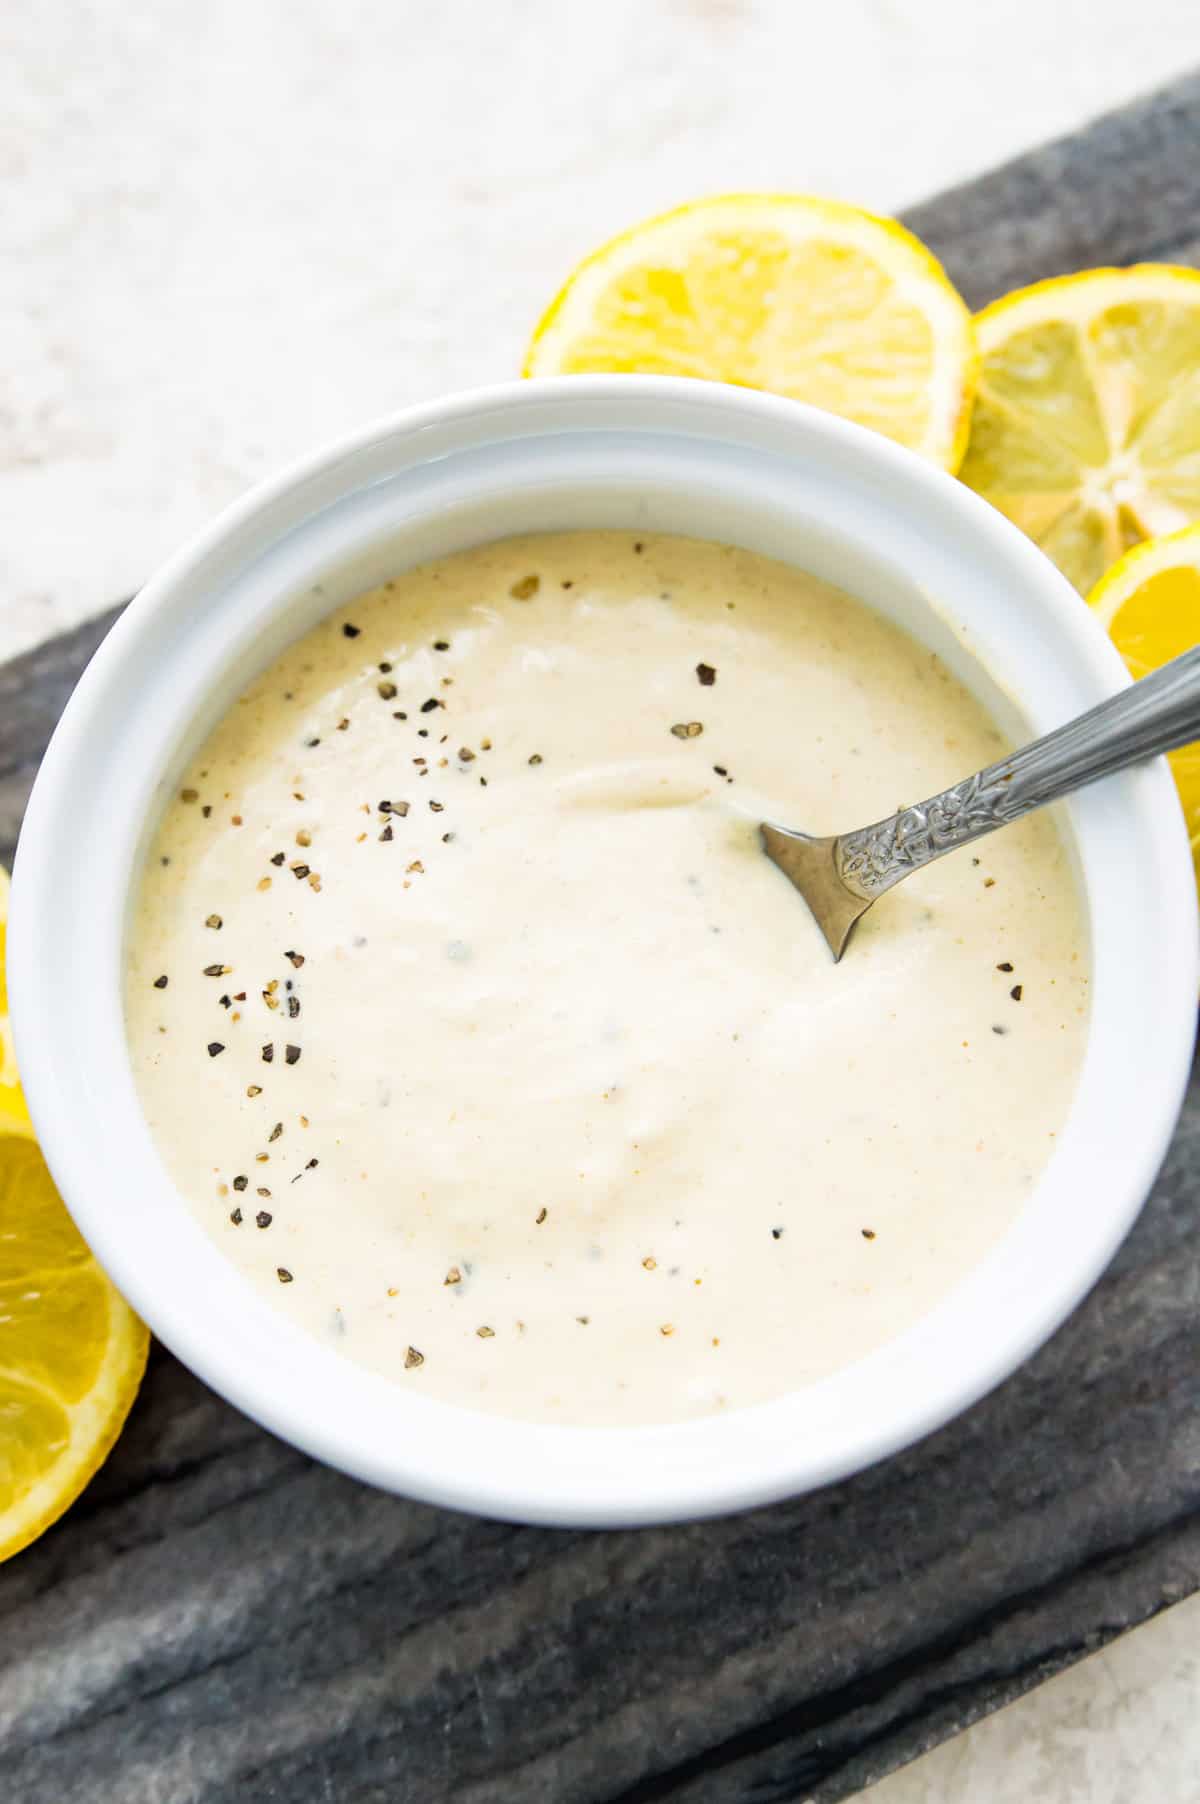 A bowl of horseradish aioli with a spoon in it, surrounded by lemon slices.